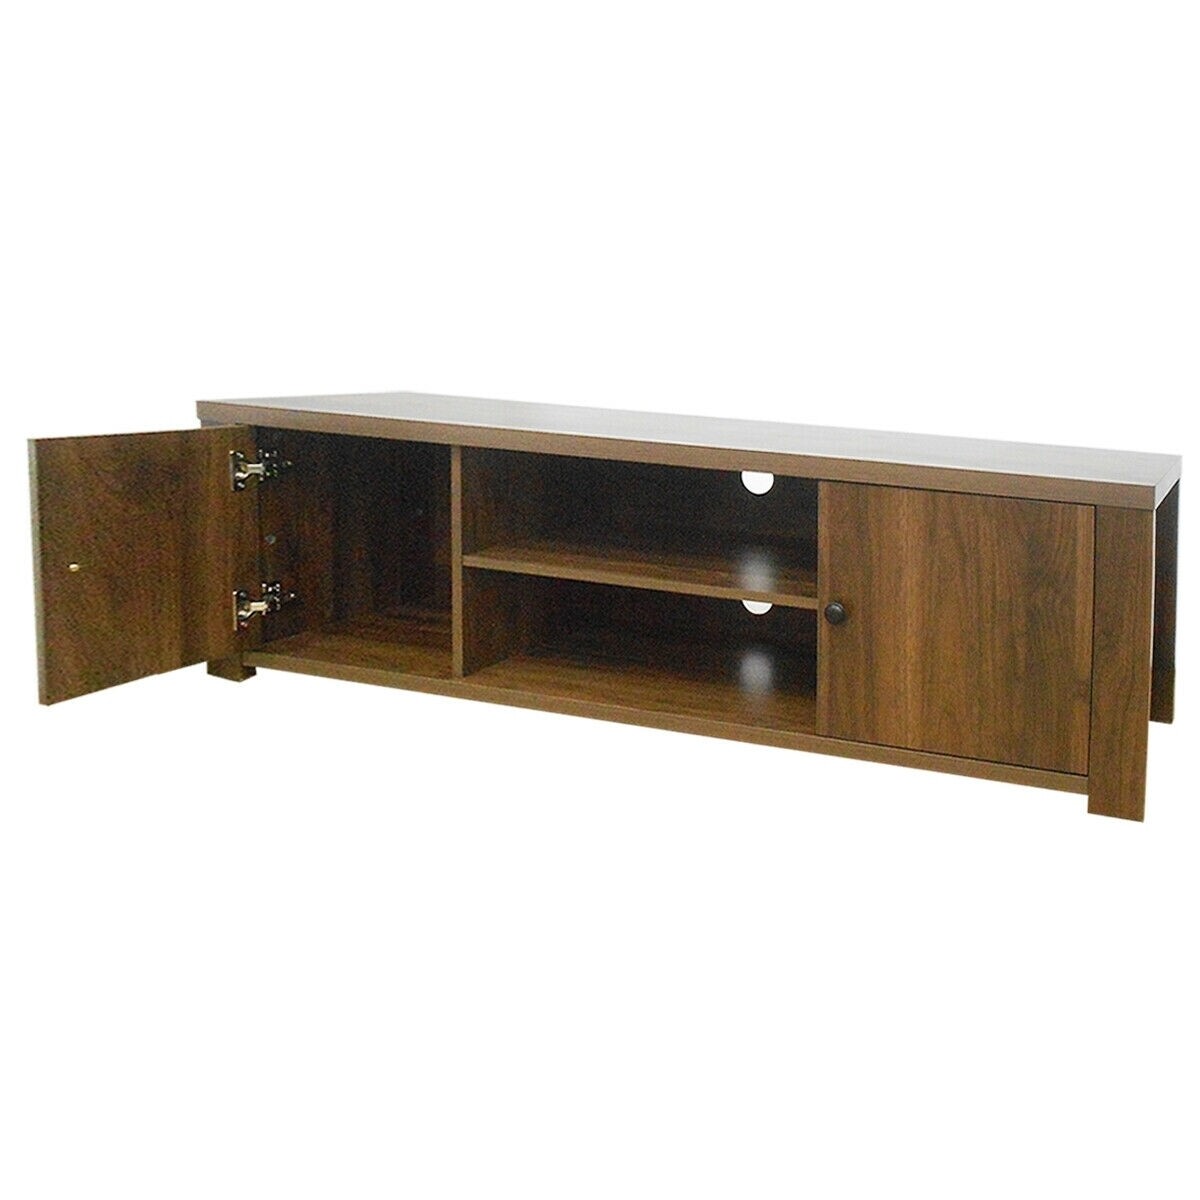 Classic Style TV Console Cabinet for 65-Inch TV with 2 Cable Management Holes - Color: Brown